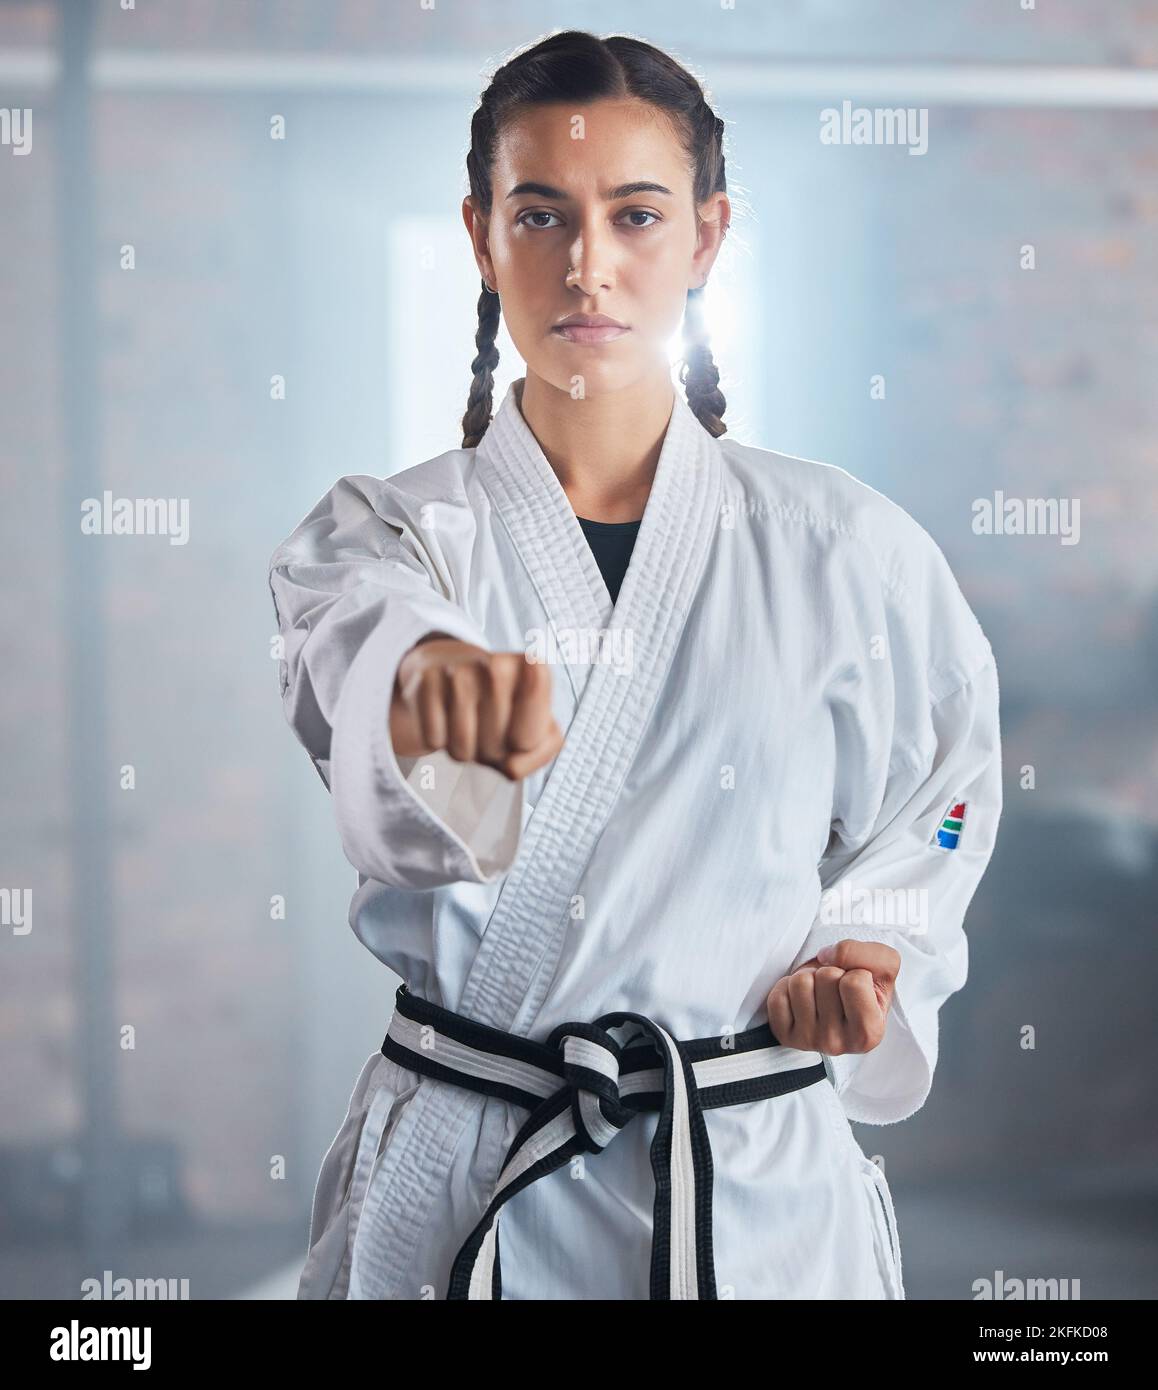 Woman, karate and punching pose in taekwondo fitness, workout or training for black belt competition, fight challenge or self defense. Portrait Stock Photo